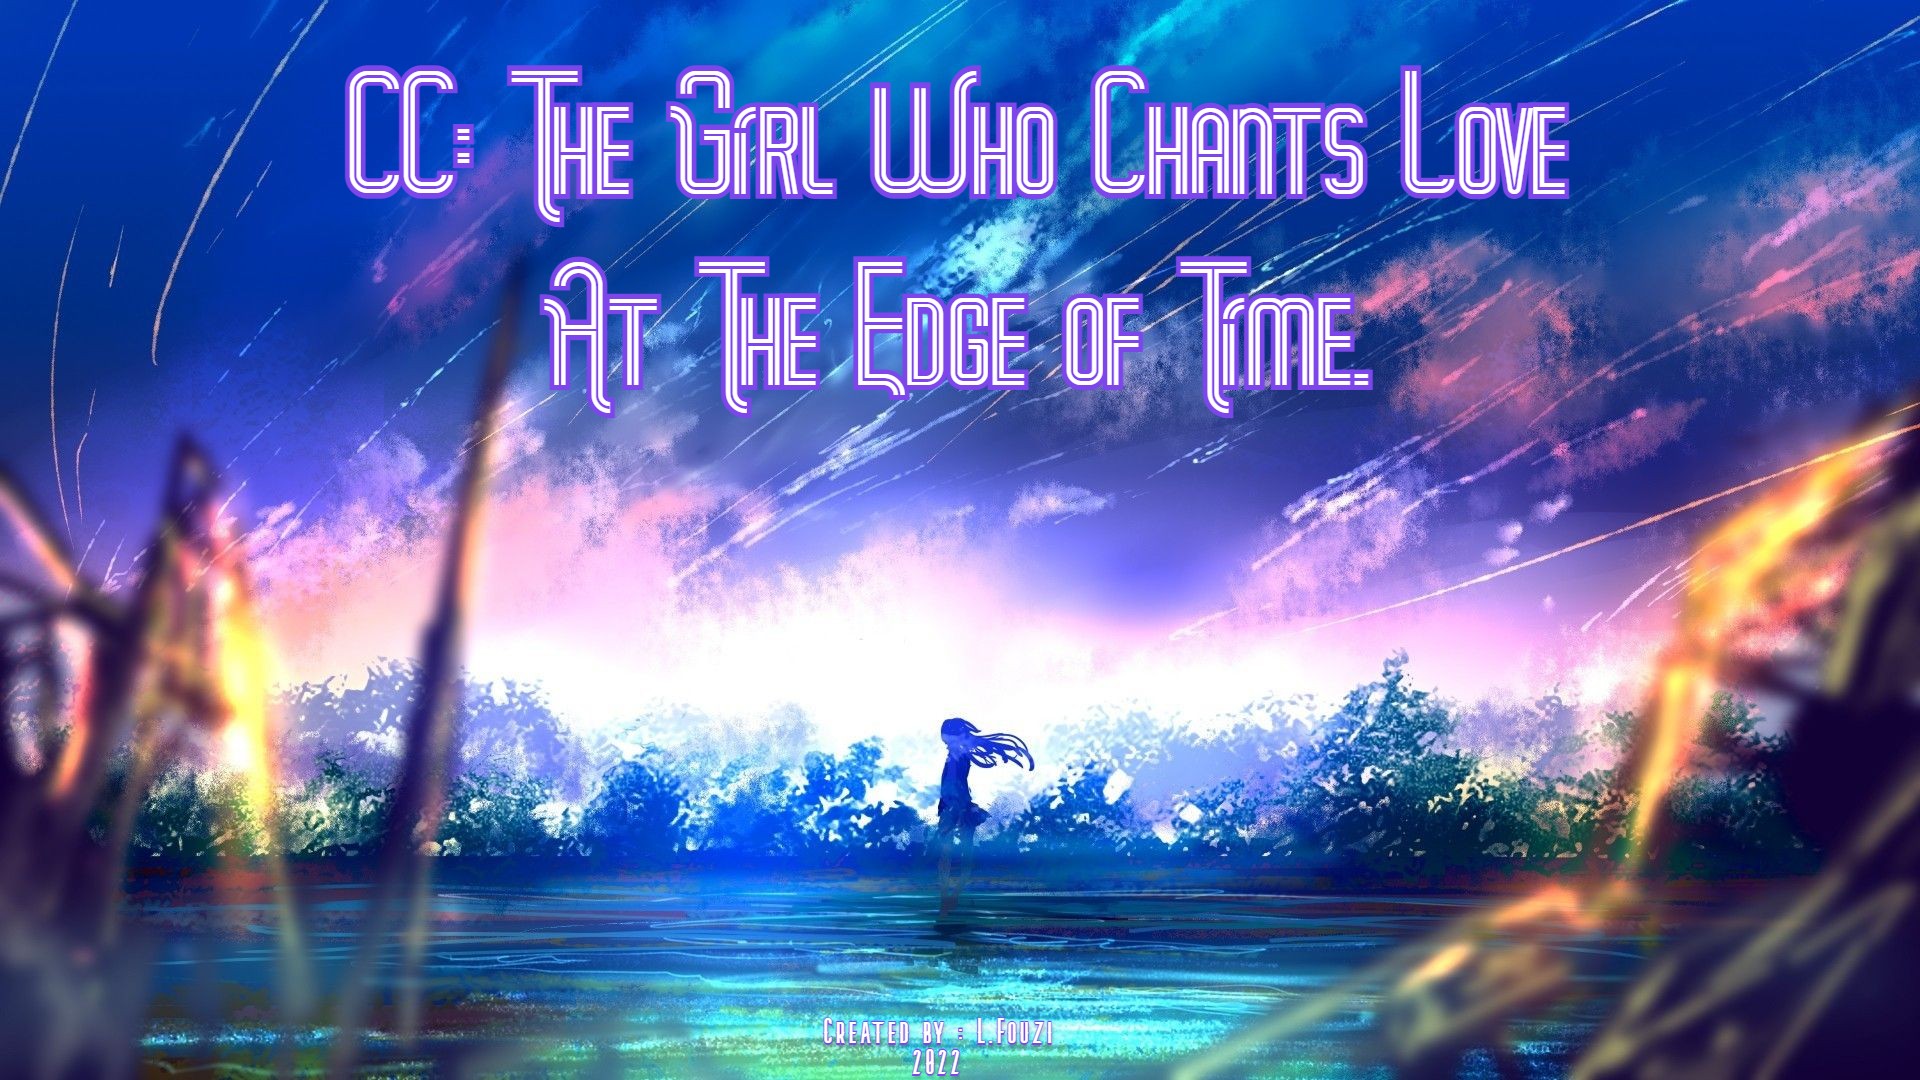 YU-NO - The Girl that Chants Love at the Edge of the World [EN] Free  Download Visual Novel